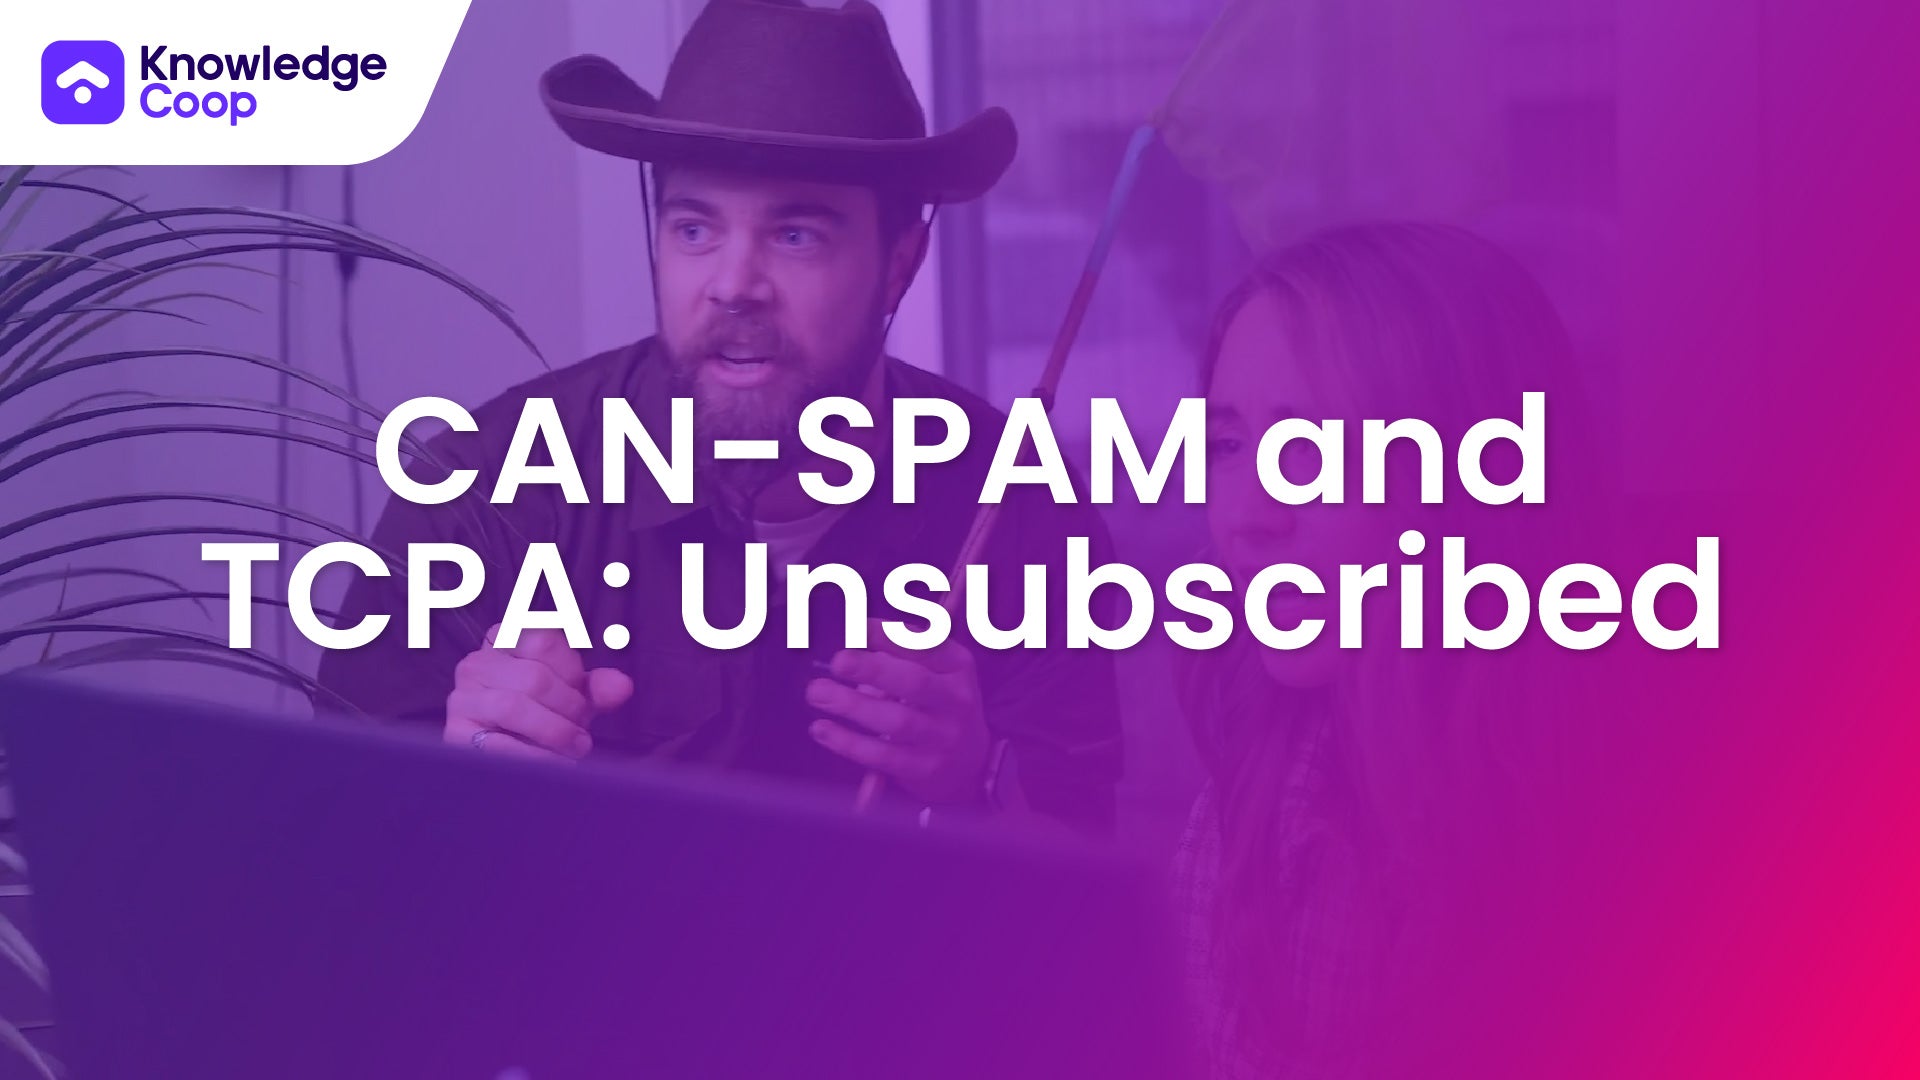 CAN-SPAM and TCPA: Unsubscribed